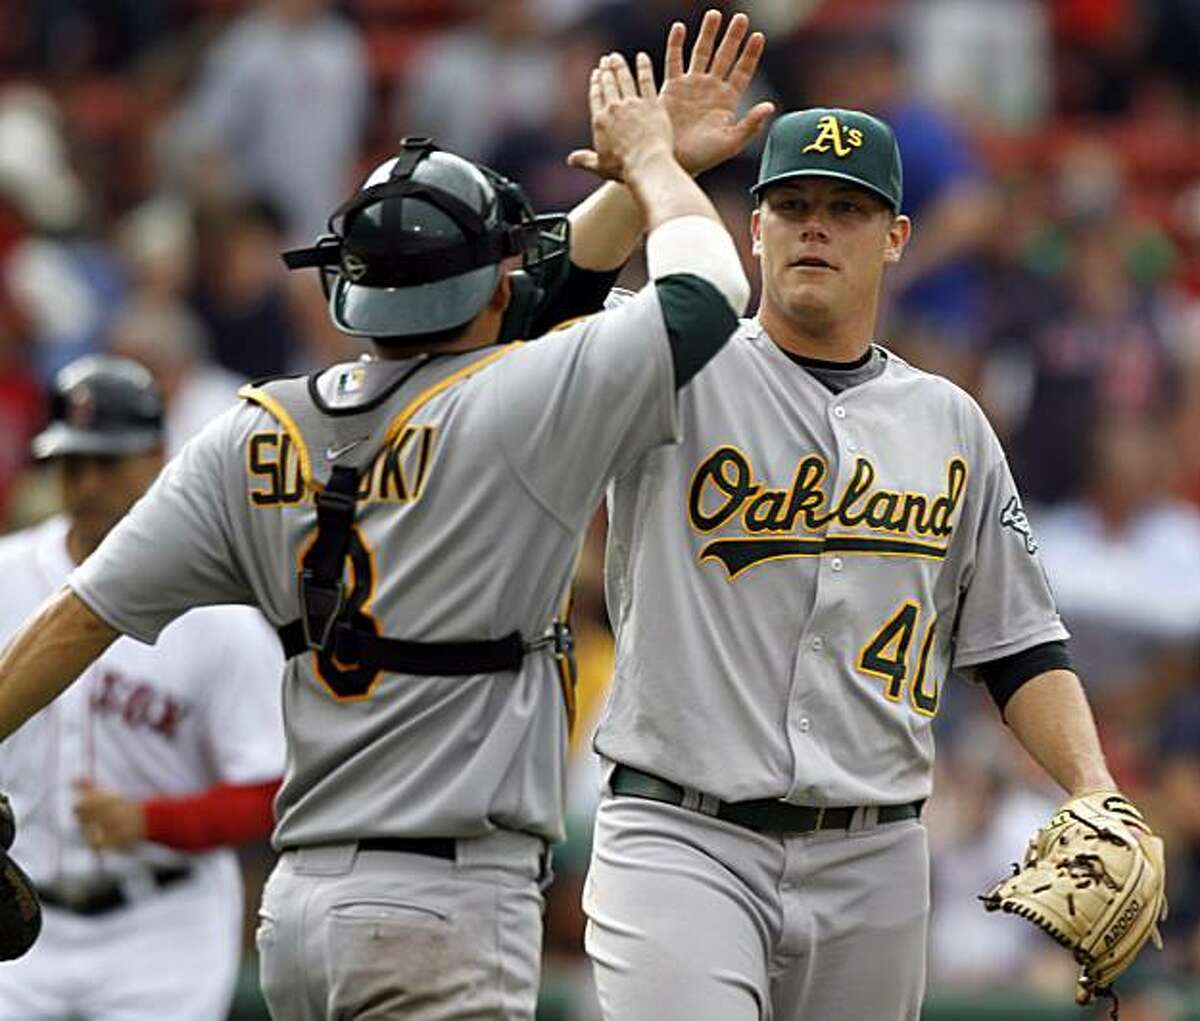 Oakland Athletics catcher Kurt Suzuki, left, and pitcher Andrew Bailey celebrate after the Athletics defeated the Boston Red Sox 9-8 in a baseball game at Boston's Fenway Park, Thursday, June 3, 2010.